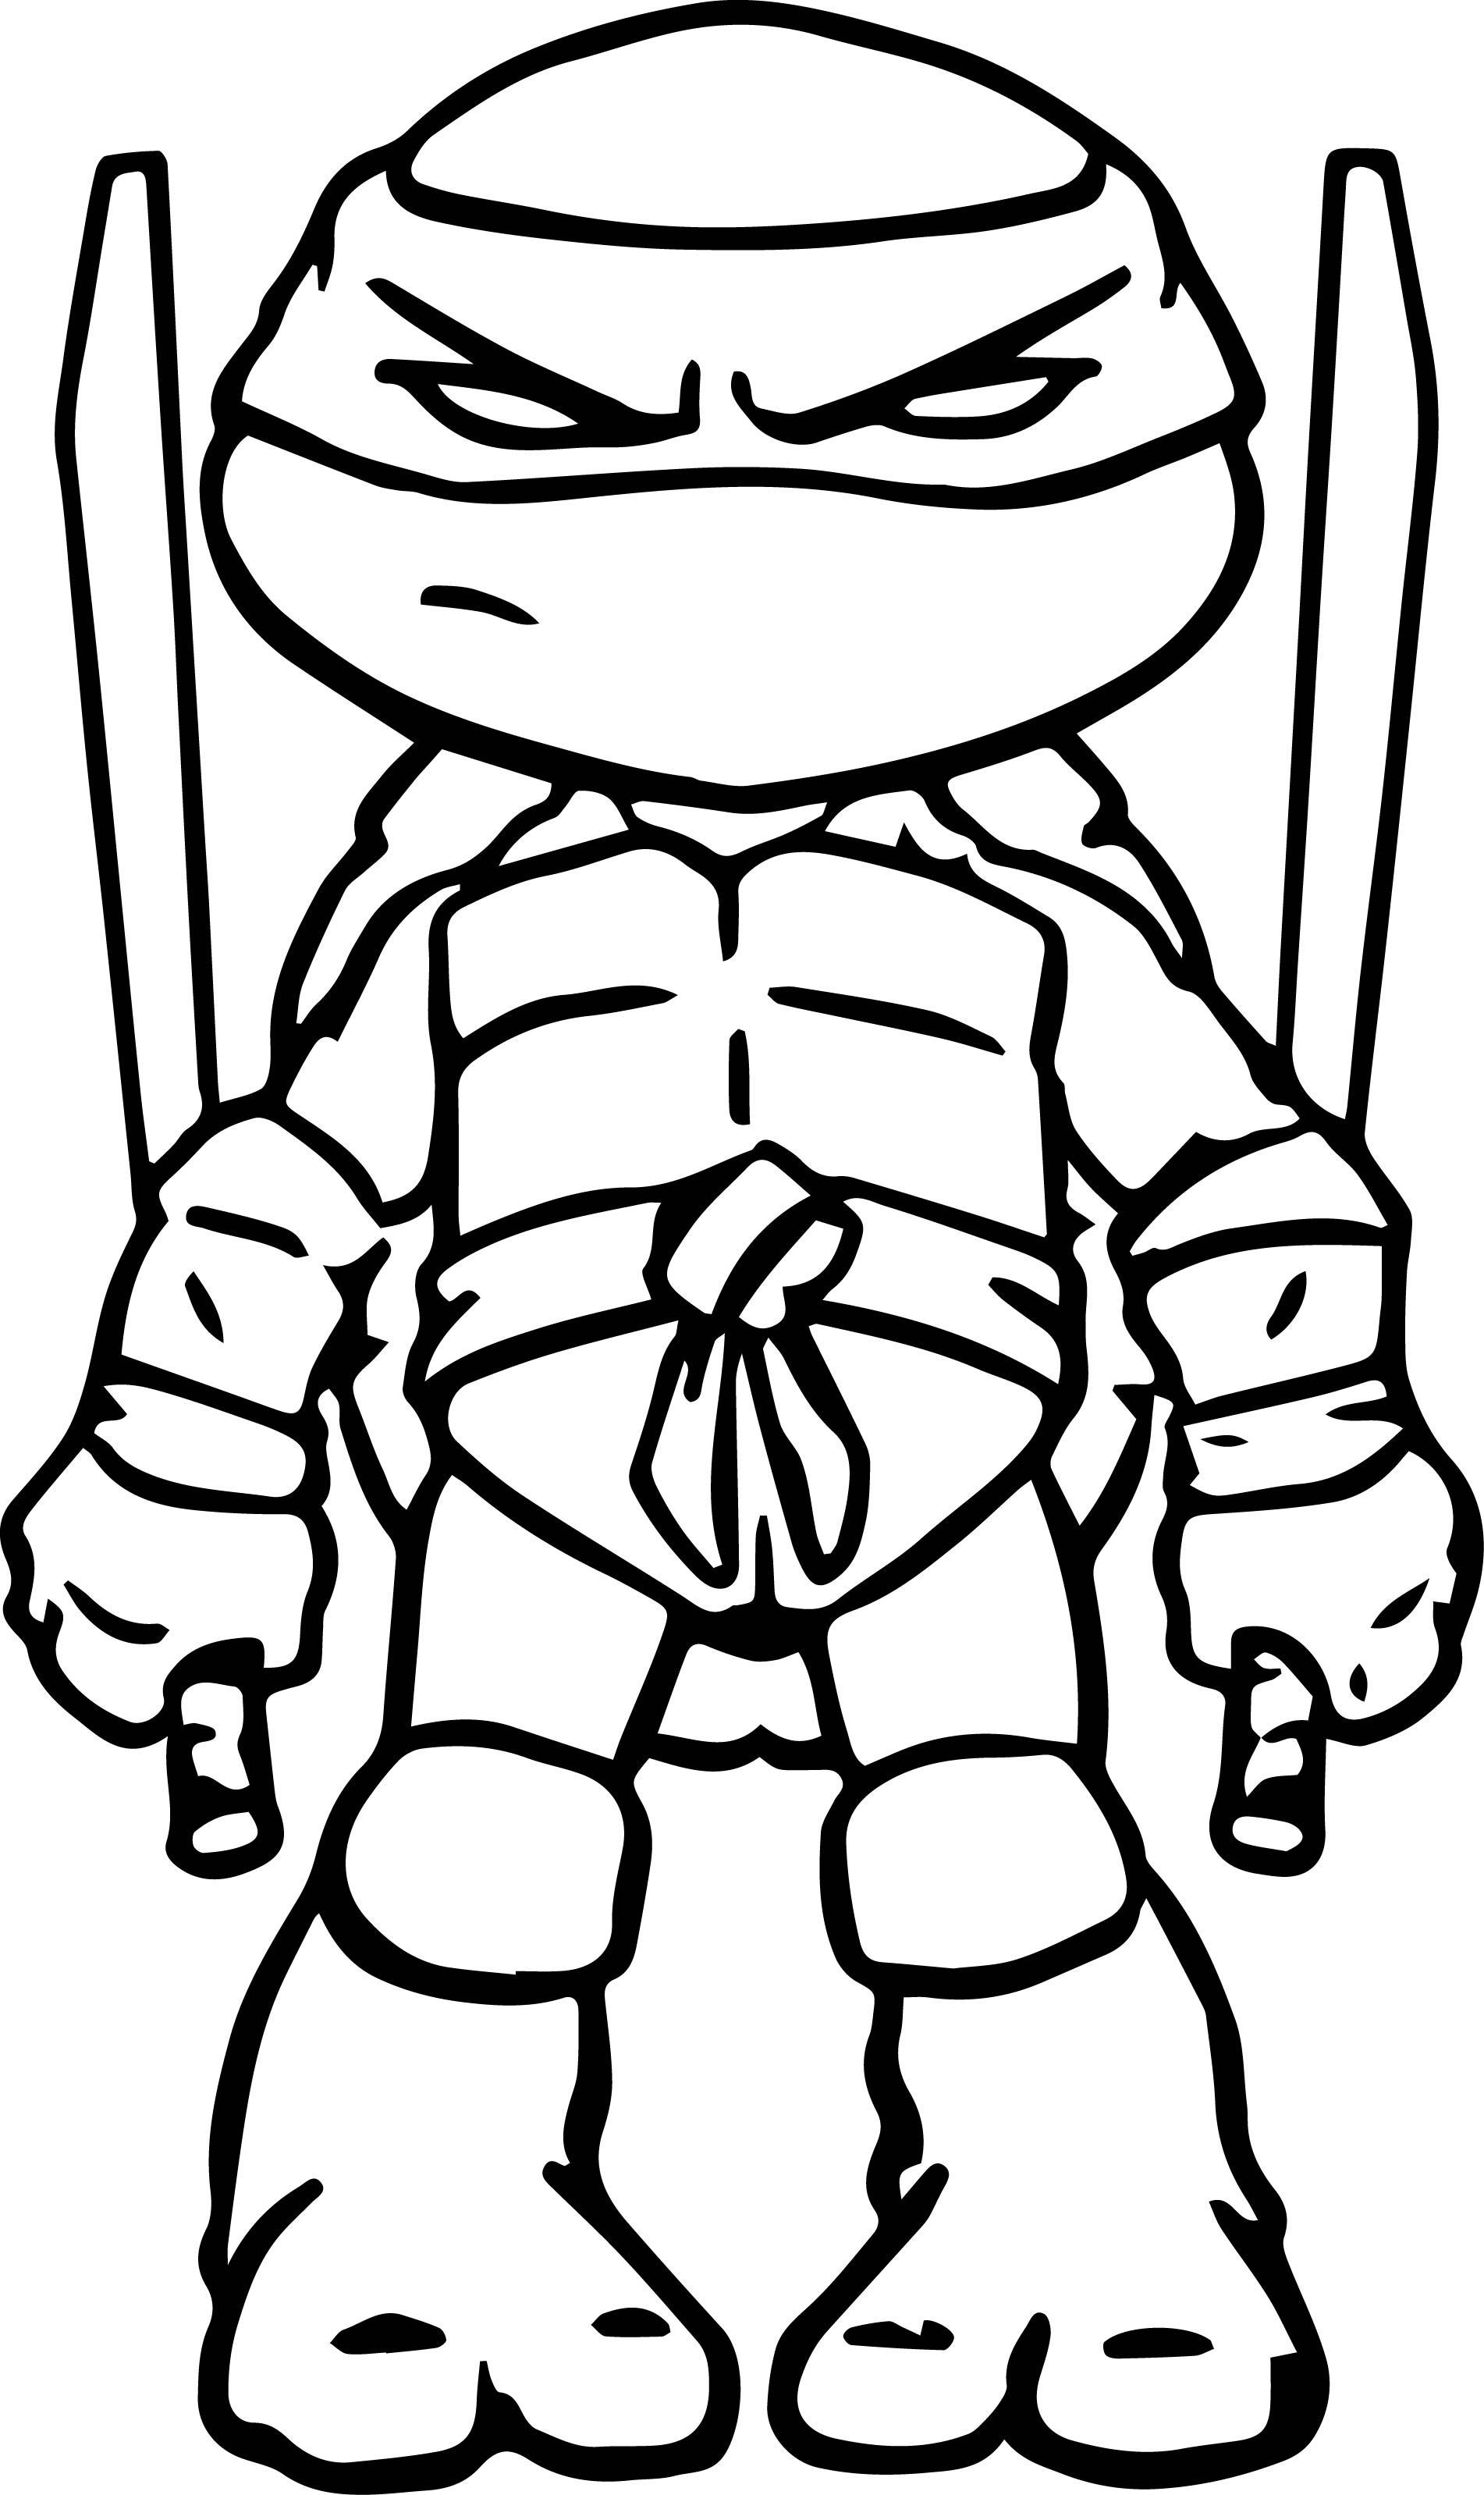 Coloring Pages To Color Online For Free
 line Coloring Pages Ninja Turtles The Color Panda